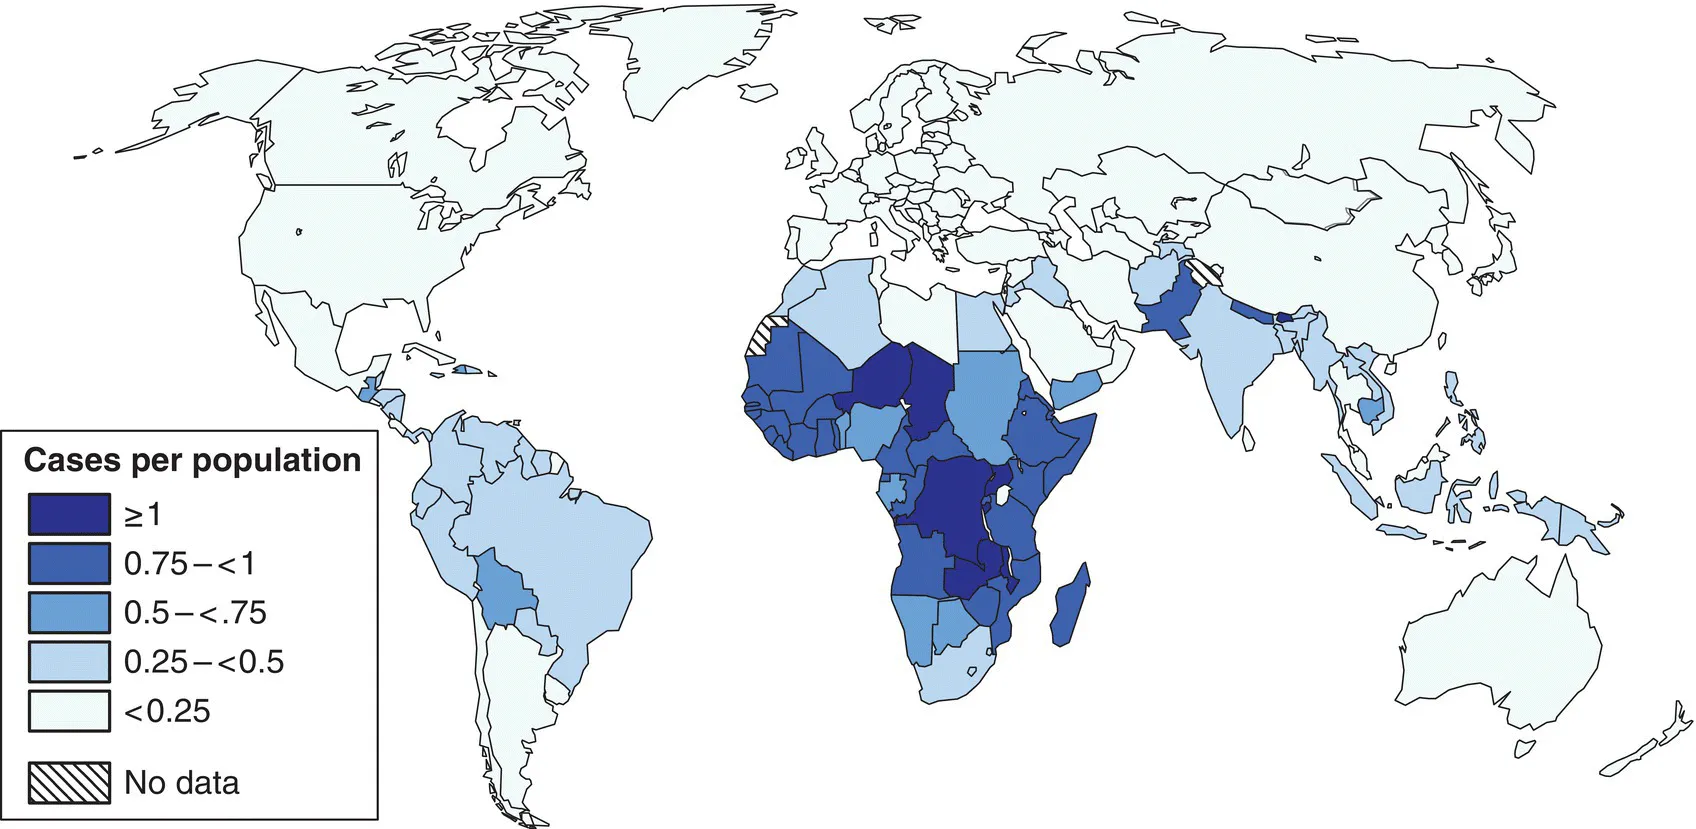 World choropleth map displaying the incidence of diarrhea per population: ≥1, 0.75–<1, 0.5–<.75, 0.25–<0.5, and <0.25 cases per population. The areas with hatched pattern have no data.